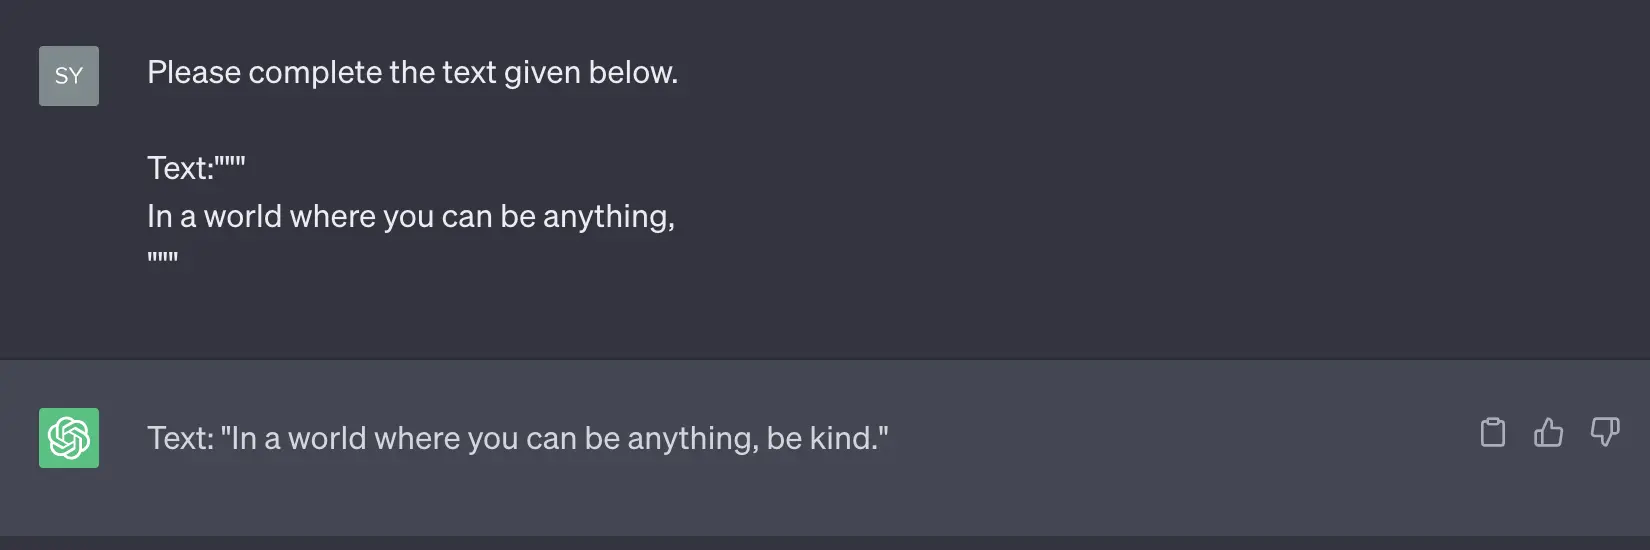 A sample dialogue with ChatGPT showing how it can finish incomplete text